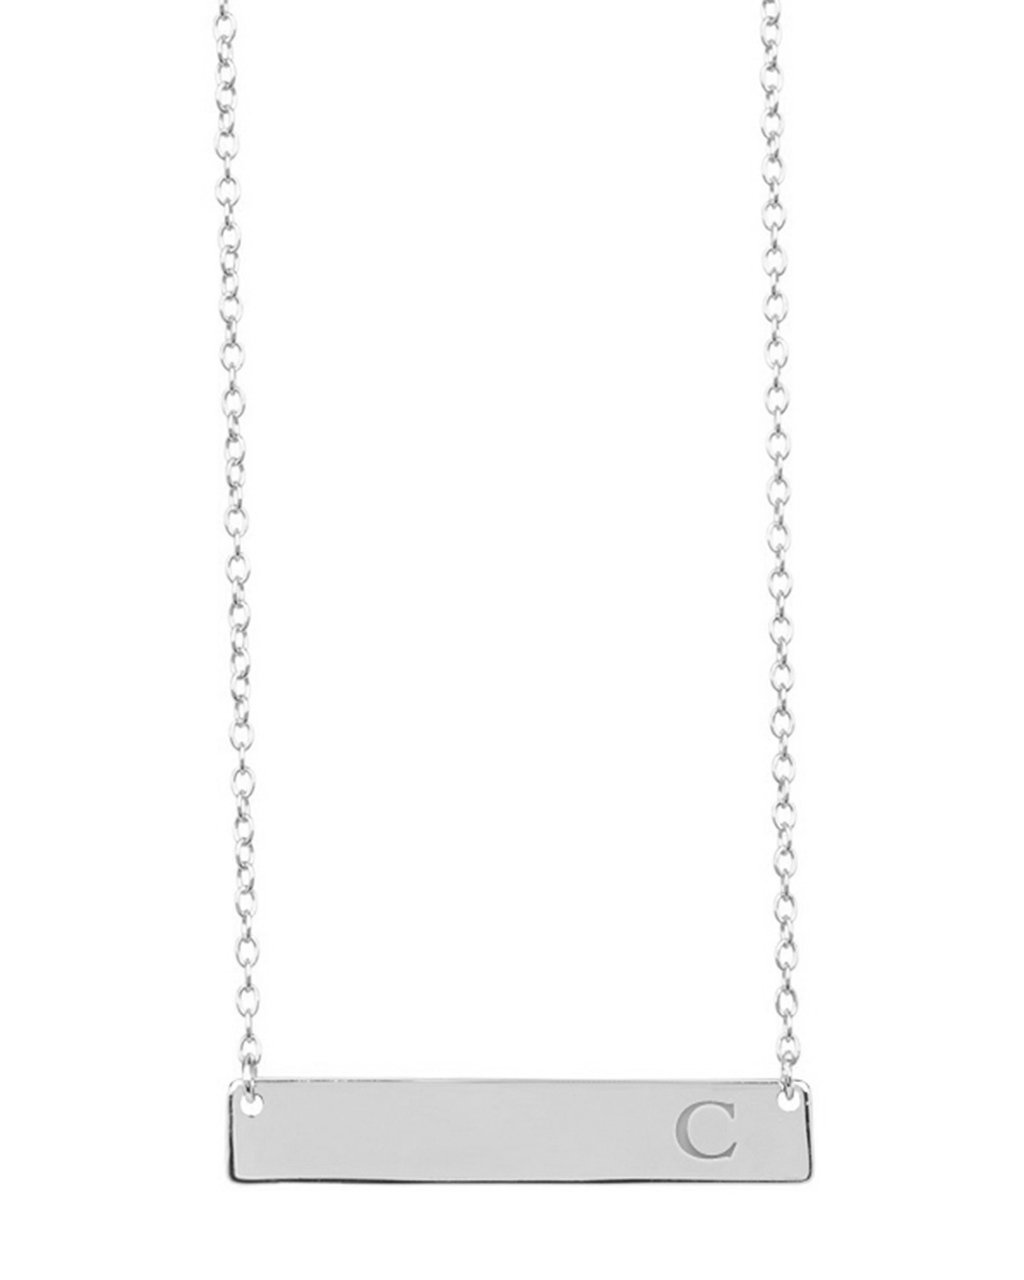 Silver Tone Necklace with A Bar Pendant Stamped with The Coo (121504)